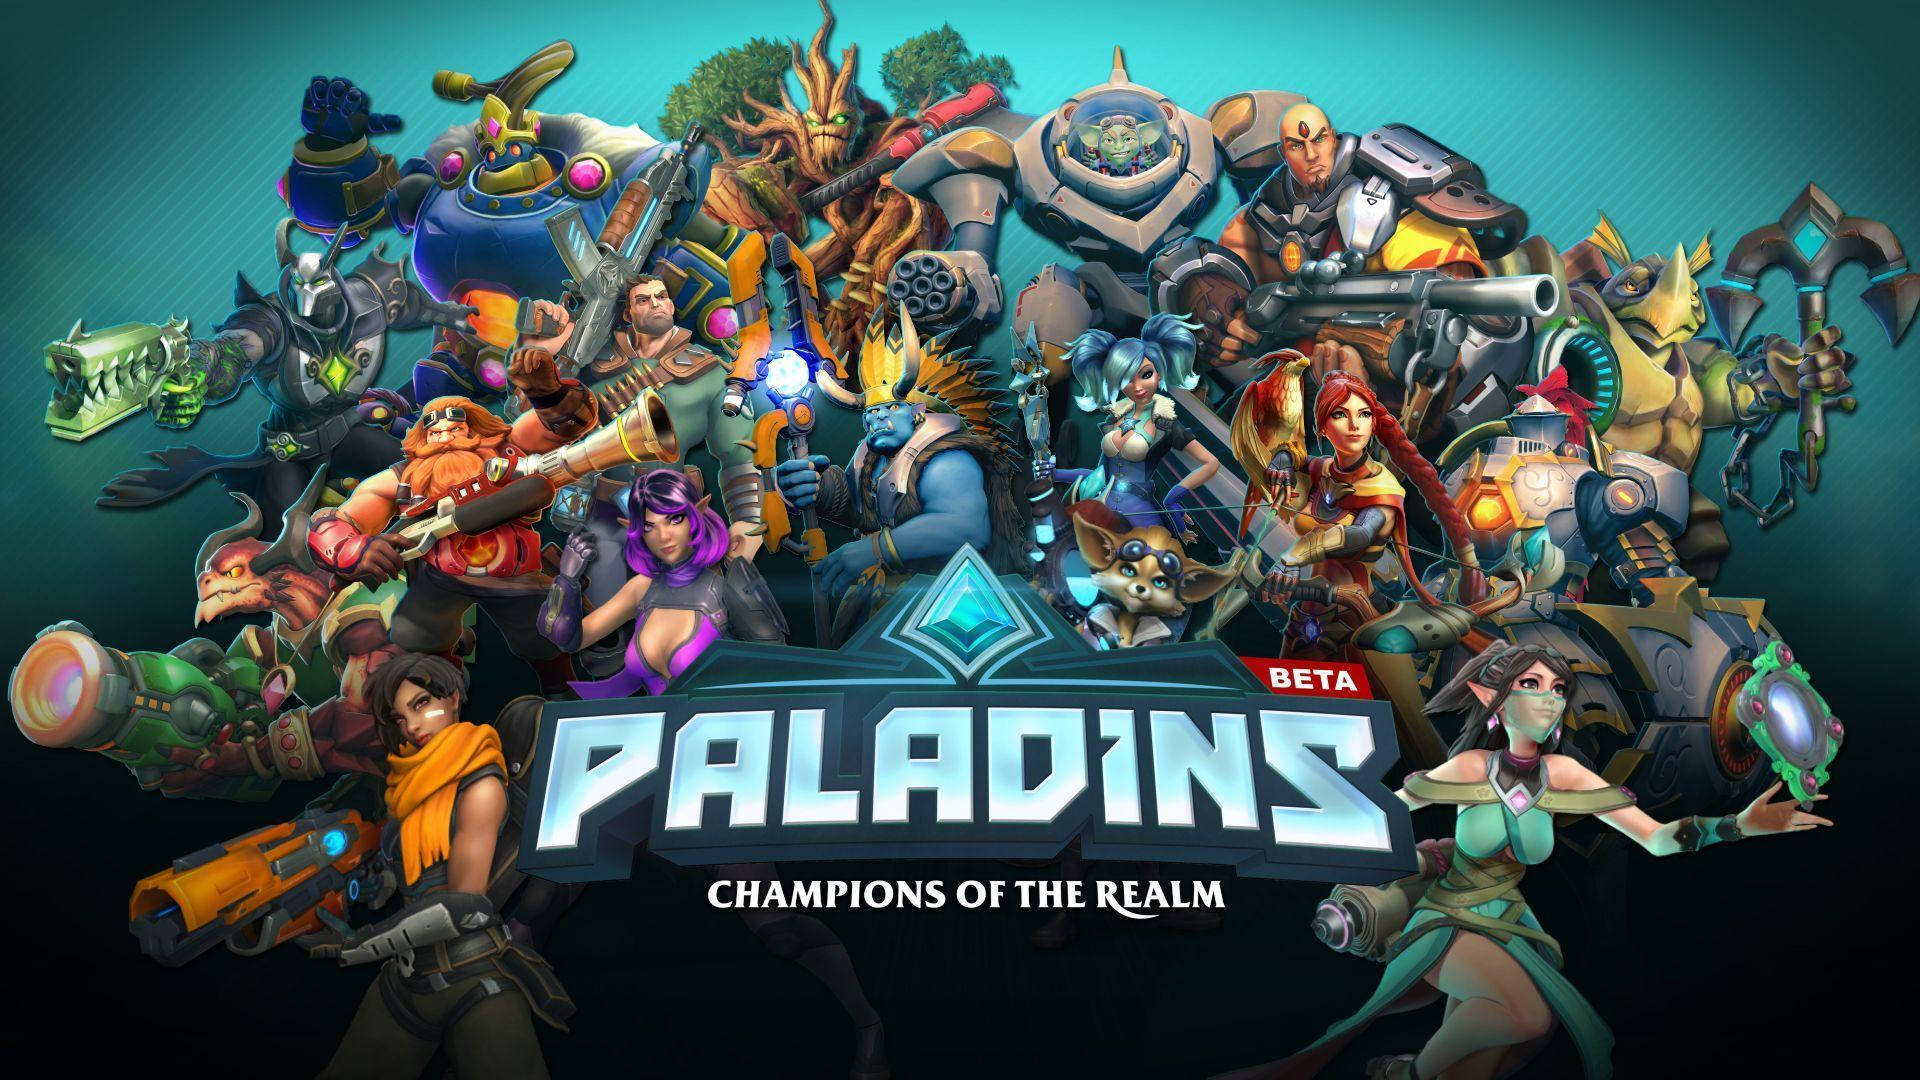 Video Game Paladins Champions Of The Realm Poster Wallpaper